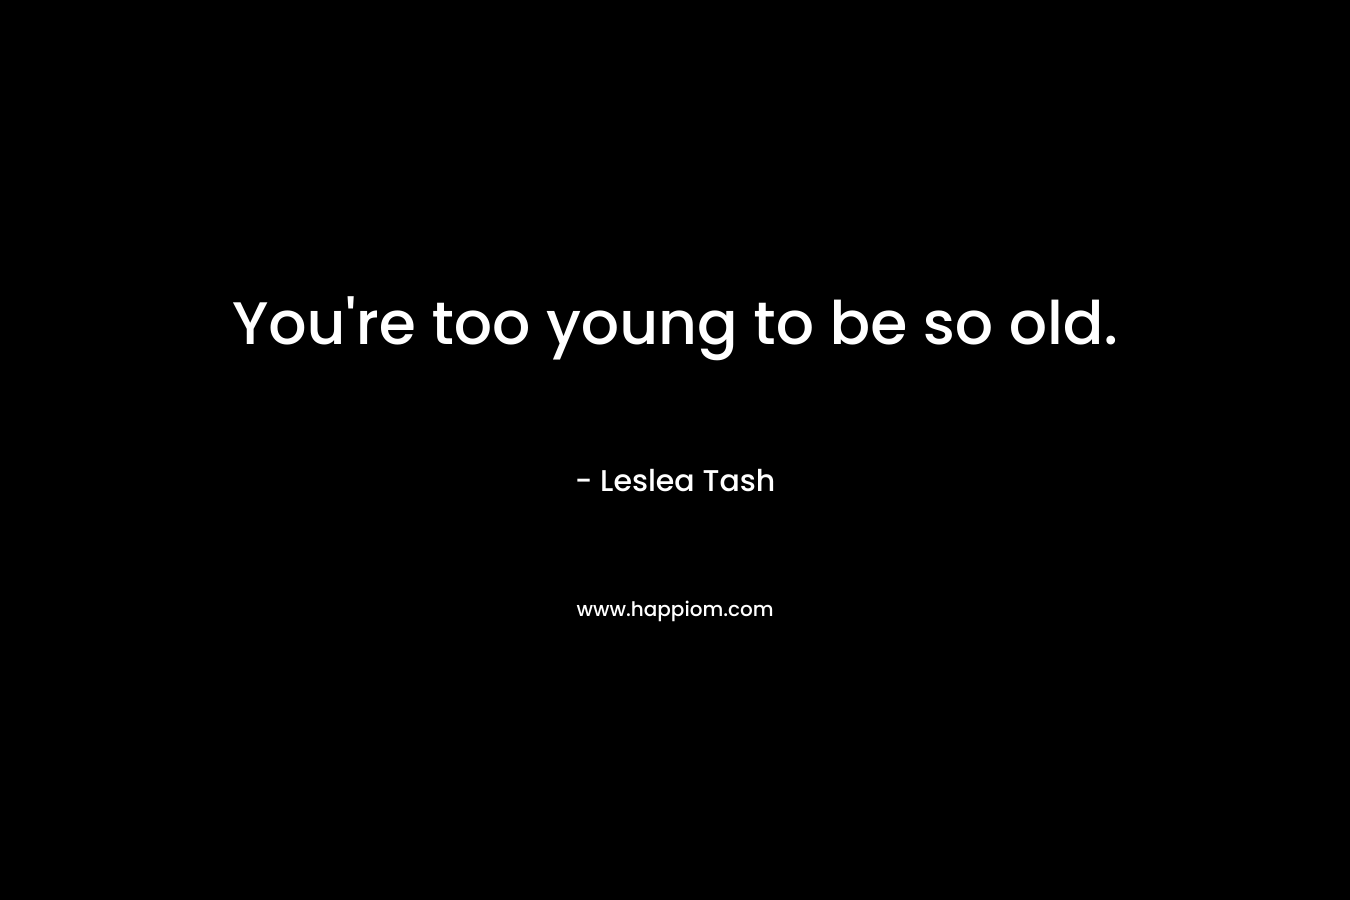 You’re too young to be so old. – Leslea Tash